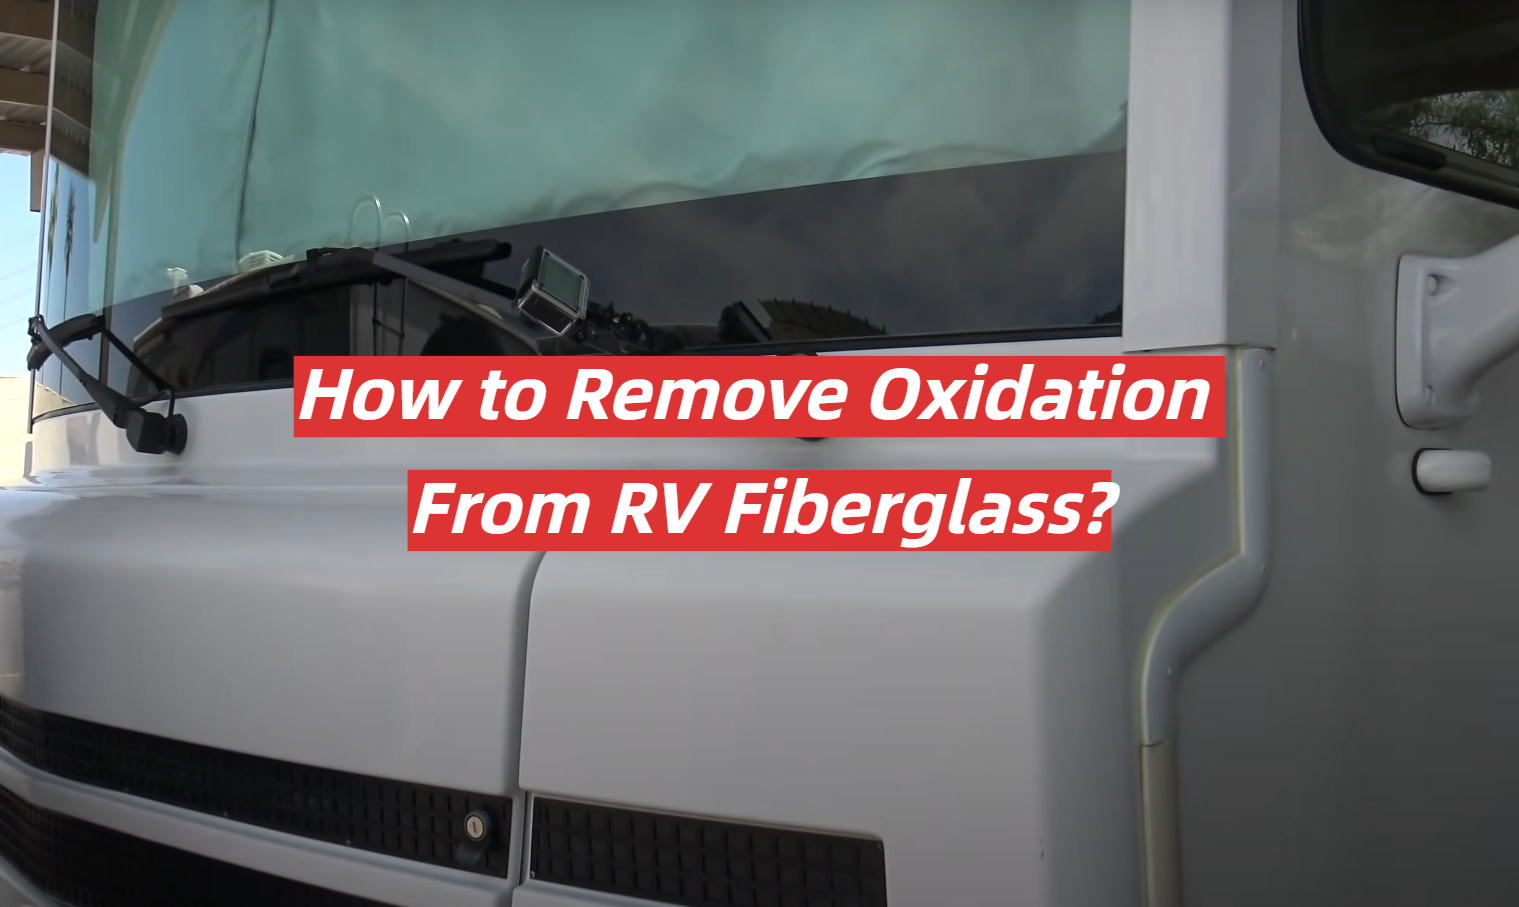 How to Remove Oxidation From RV Fiberglass?